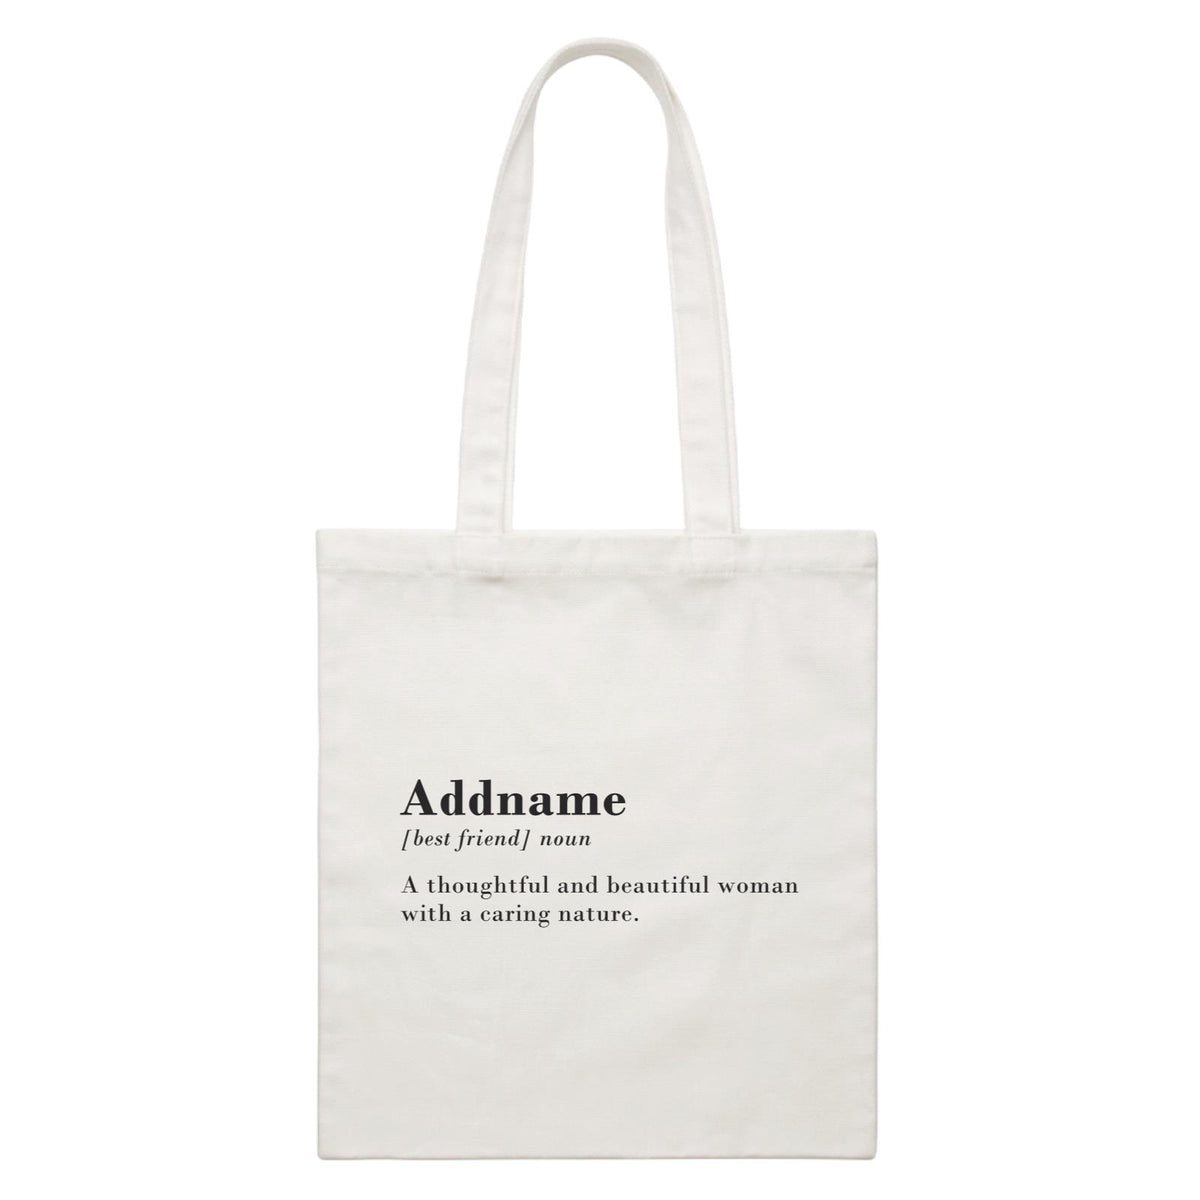 Best Canvas Tote Bags | Cool Tote Bags to Make Your Outfit More Unique